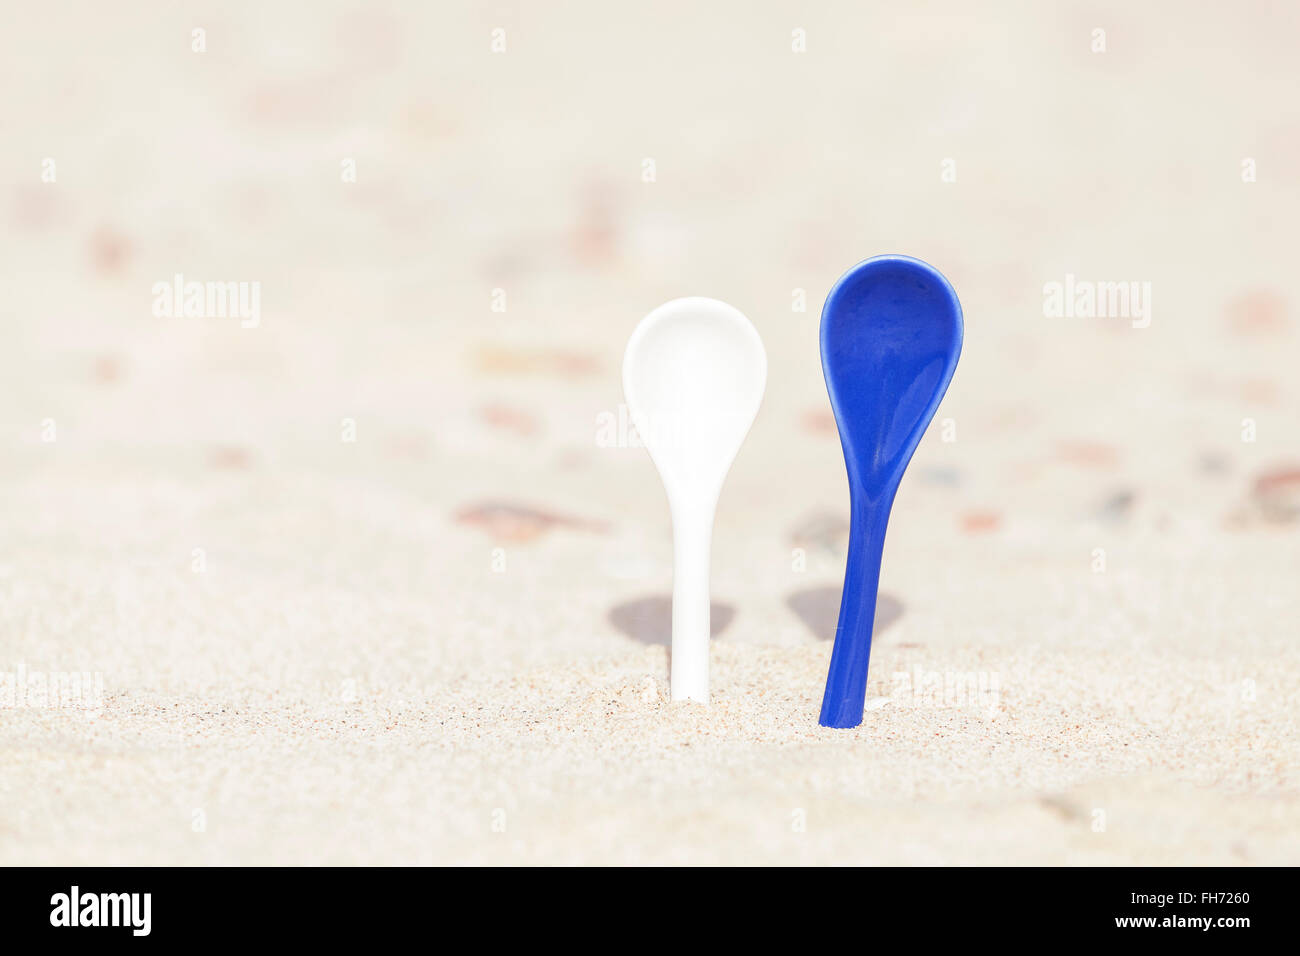 White and blue porcelain spoons stuck in sand. Stock Photo